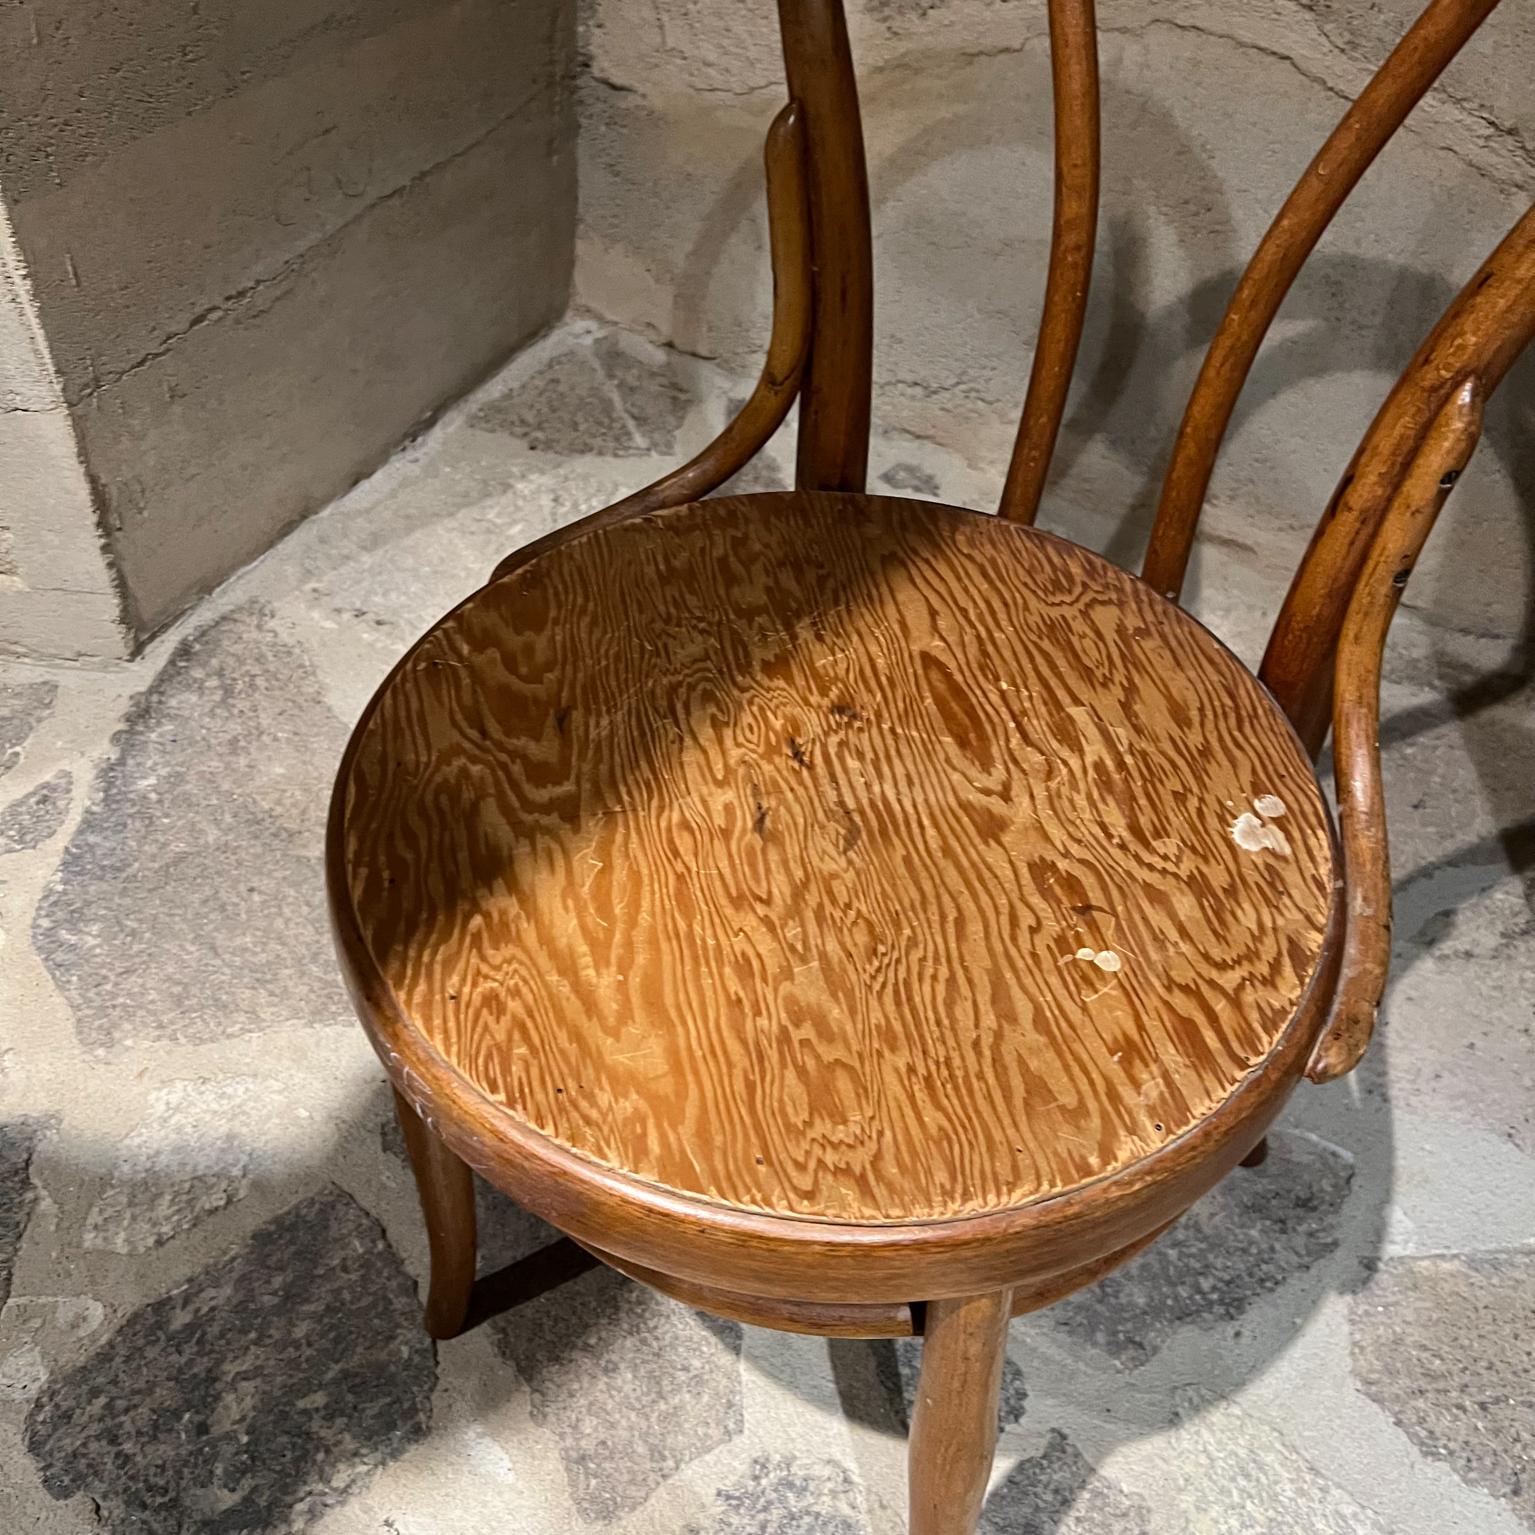 Vintage Thonet Project Cafe Dining Chair
Stamped AUSTRIA.
Bentwood Plywood
33.5 tall x 18 w x 20.25 d Seat 17.5
Original fair vintage condition unrestored. Plywood seat replaced the original cane weaving (missing). Some screws are original.
Refer to